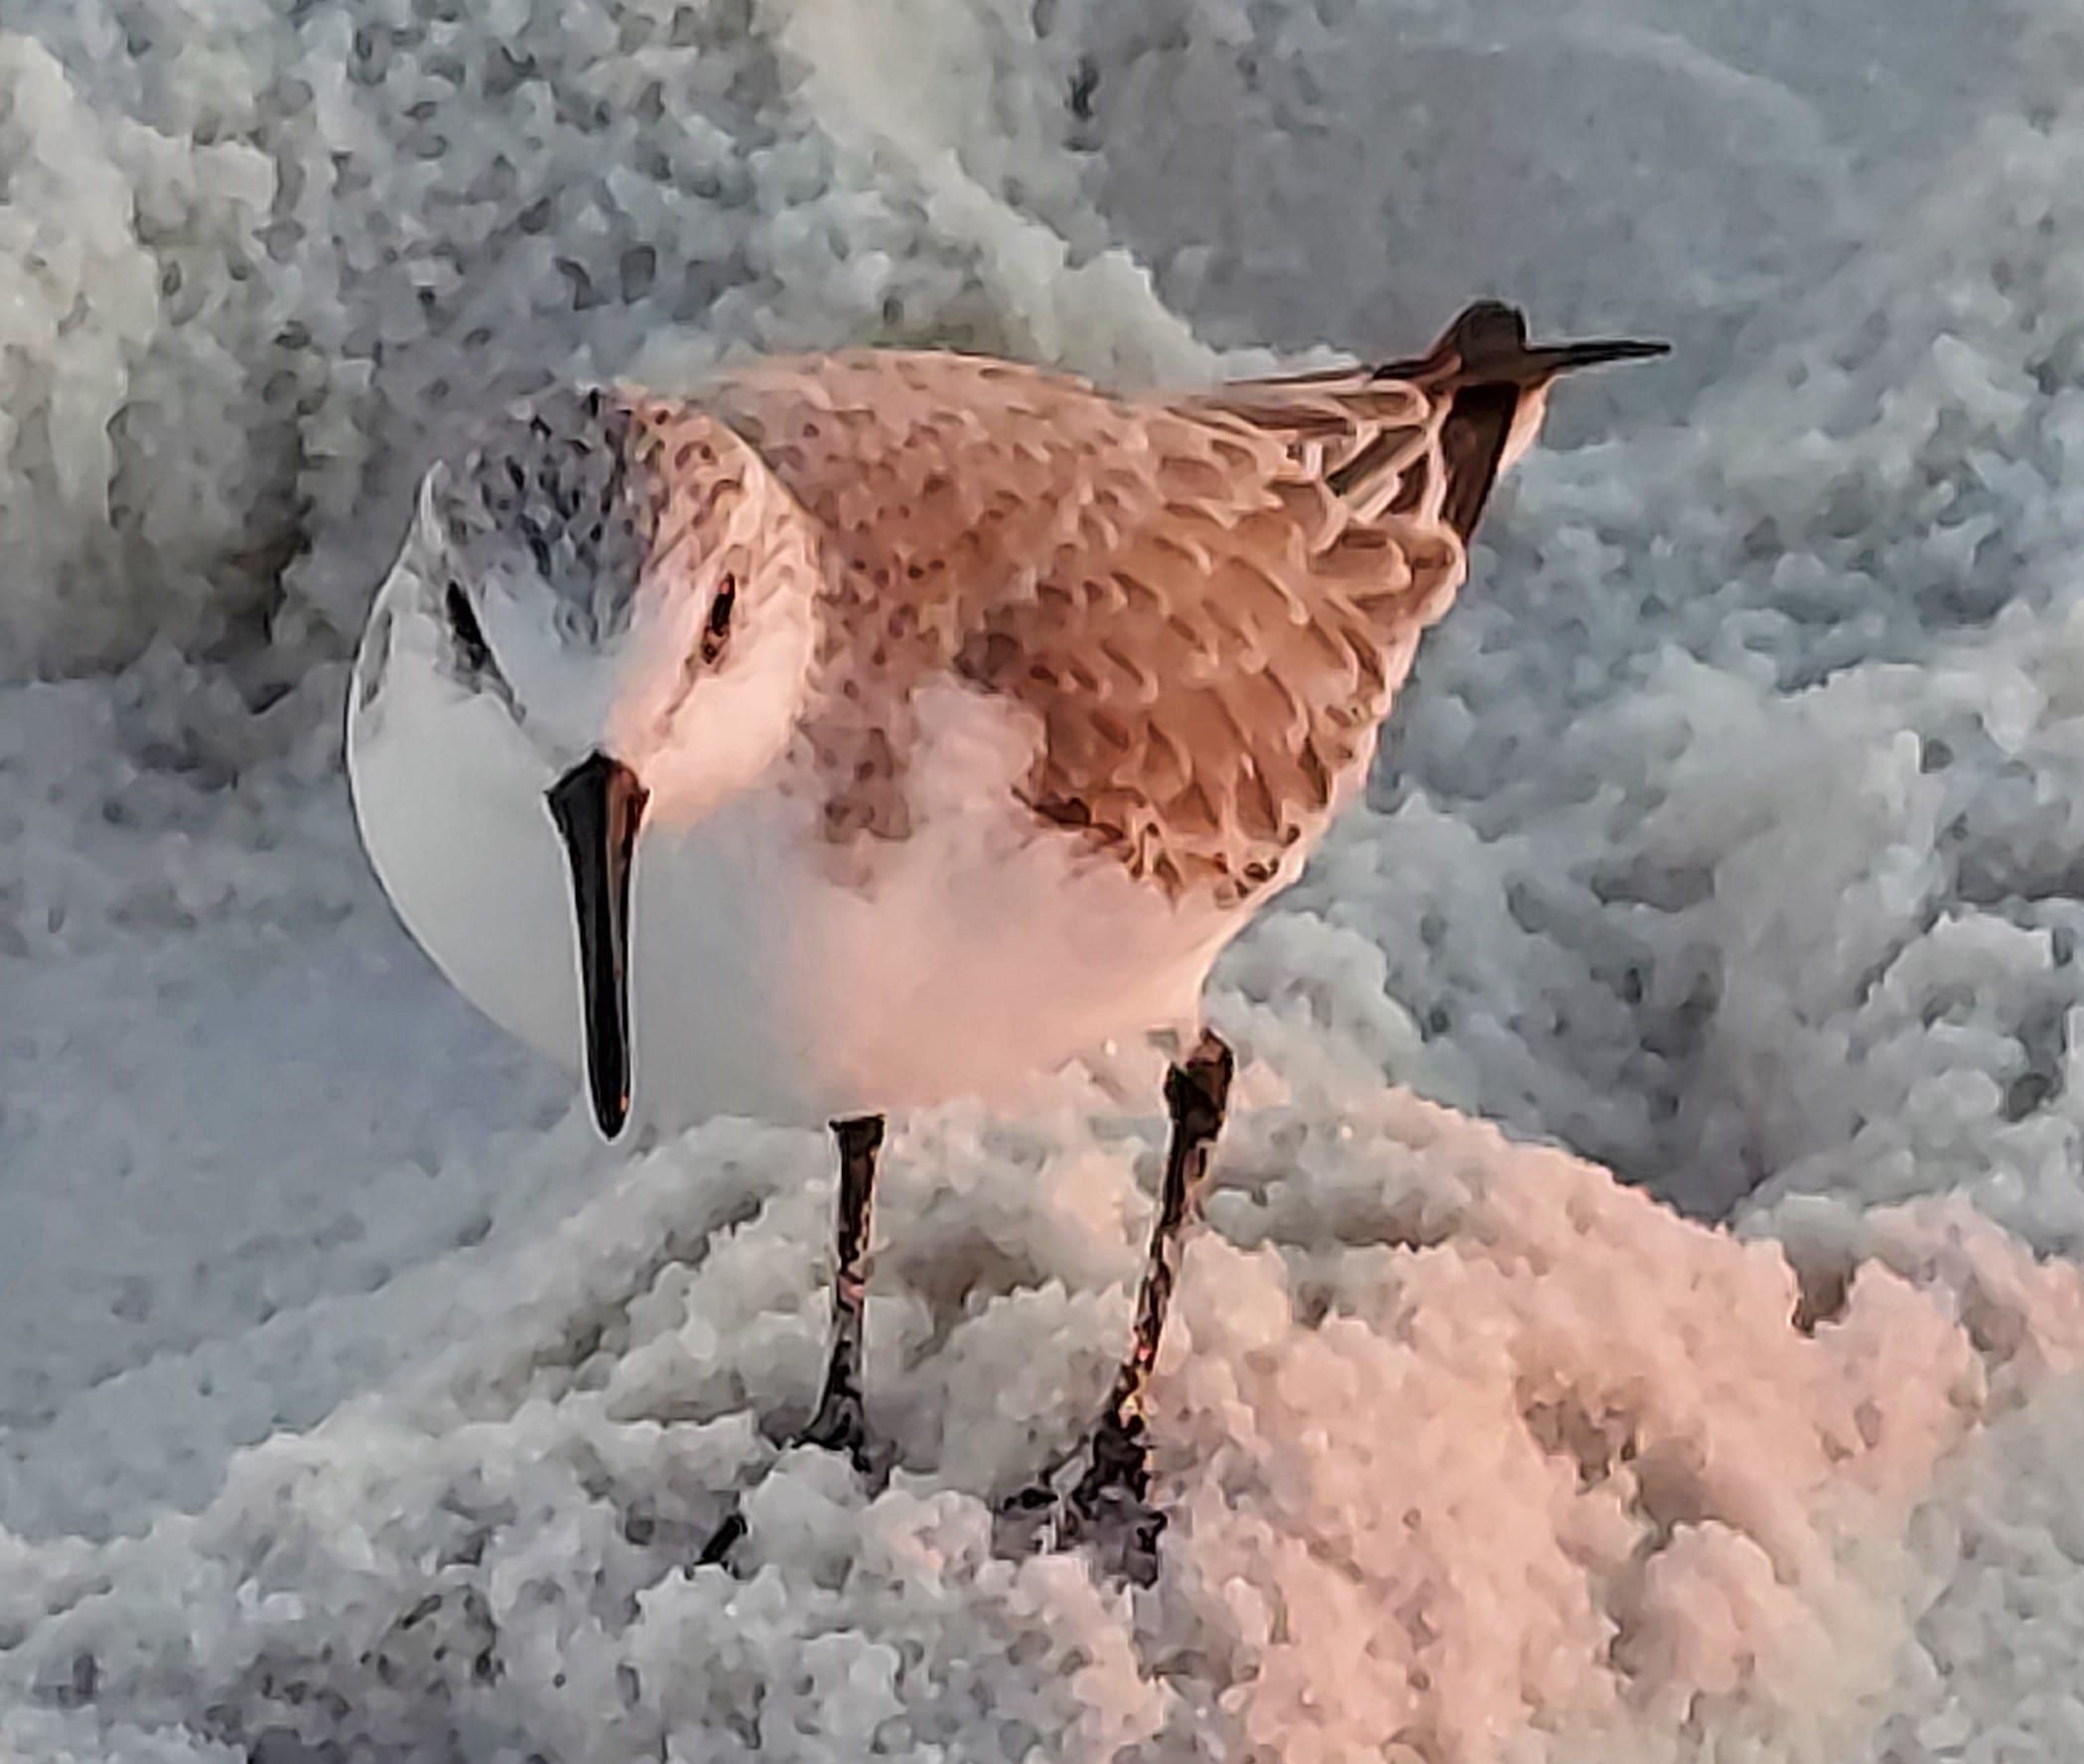 We hope this cute sanderling cures your case of the Monday morning blues.
Today's Photo of the Day was taken by Nancy Smith.